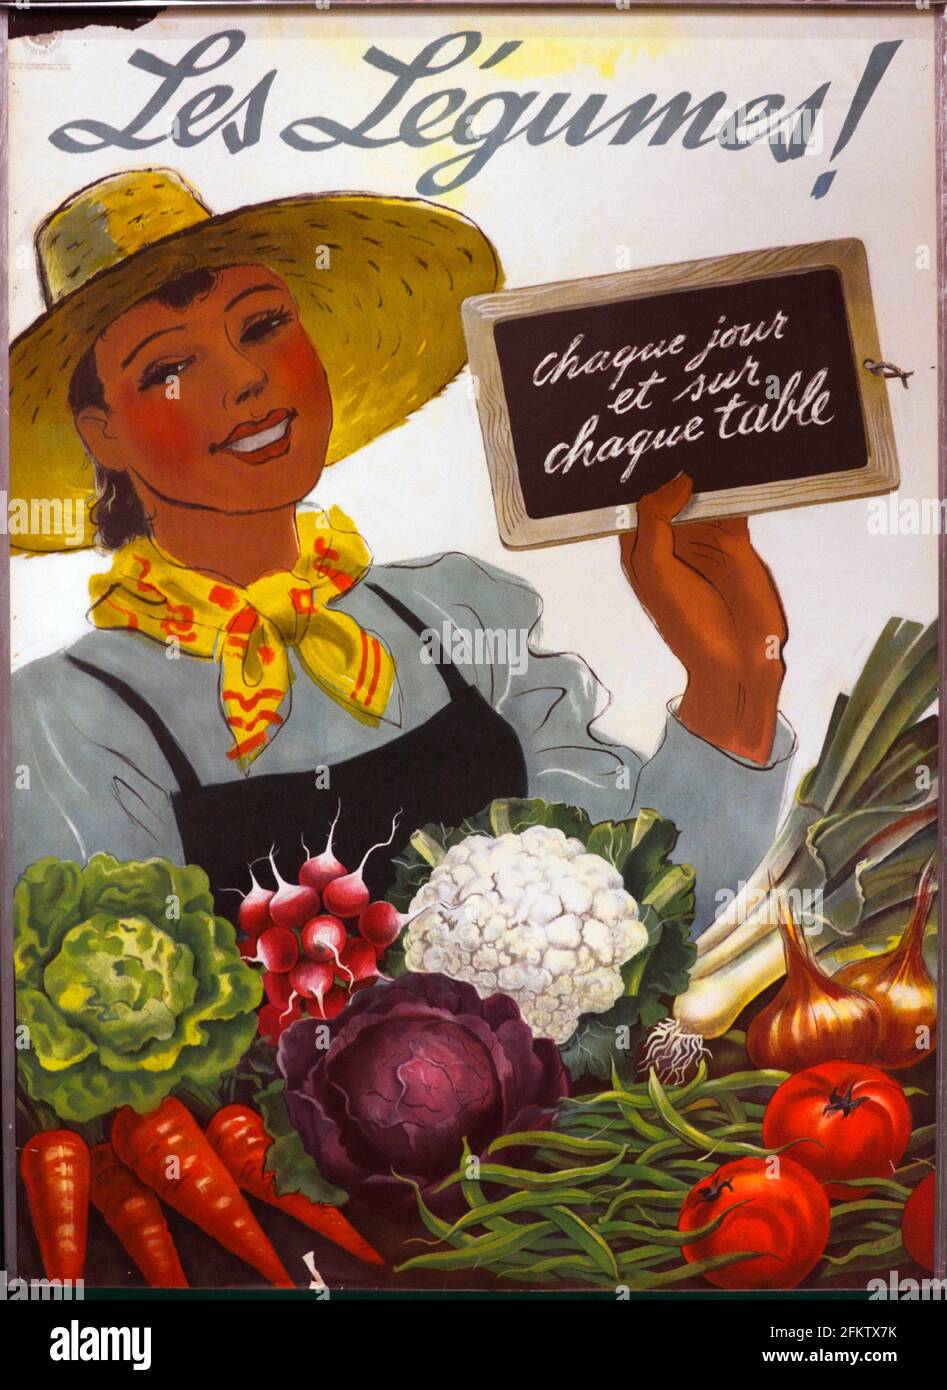 Dietary advice that still lasts, anonymous poster from 1941 promoting eating healthy vegetables with slogan - 'Les légumes ! Chaque jour et sur Stock Photo